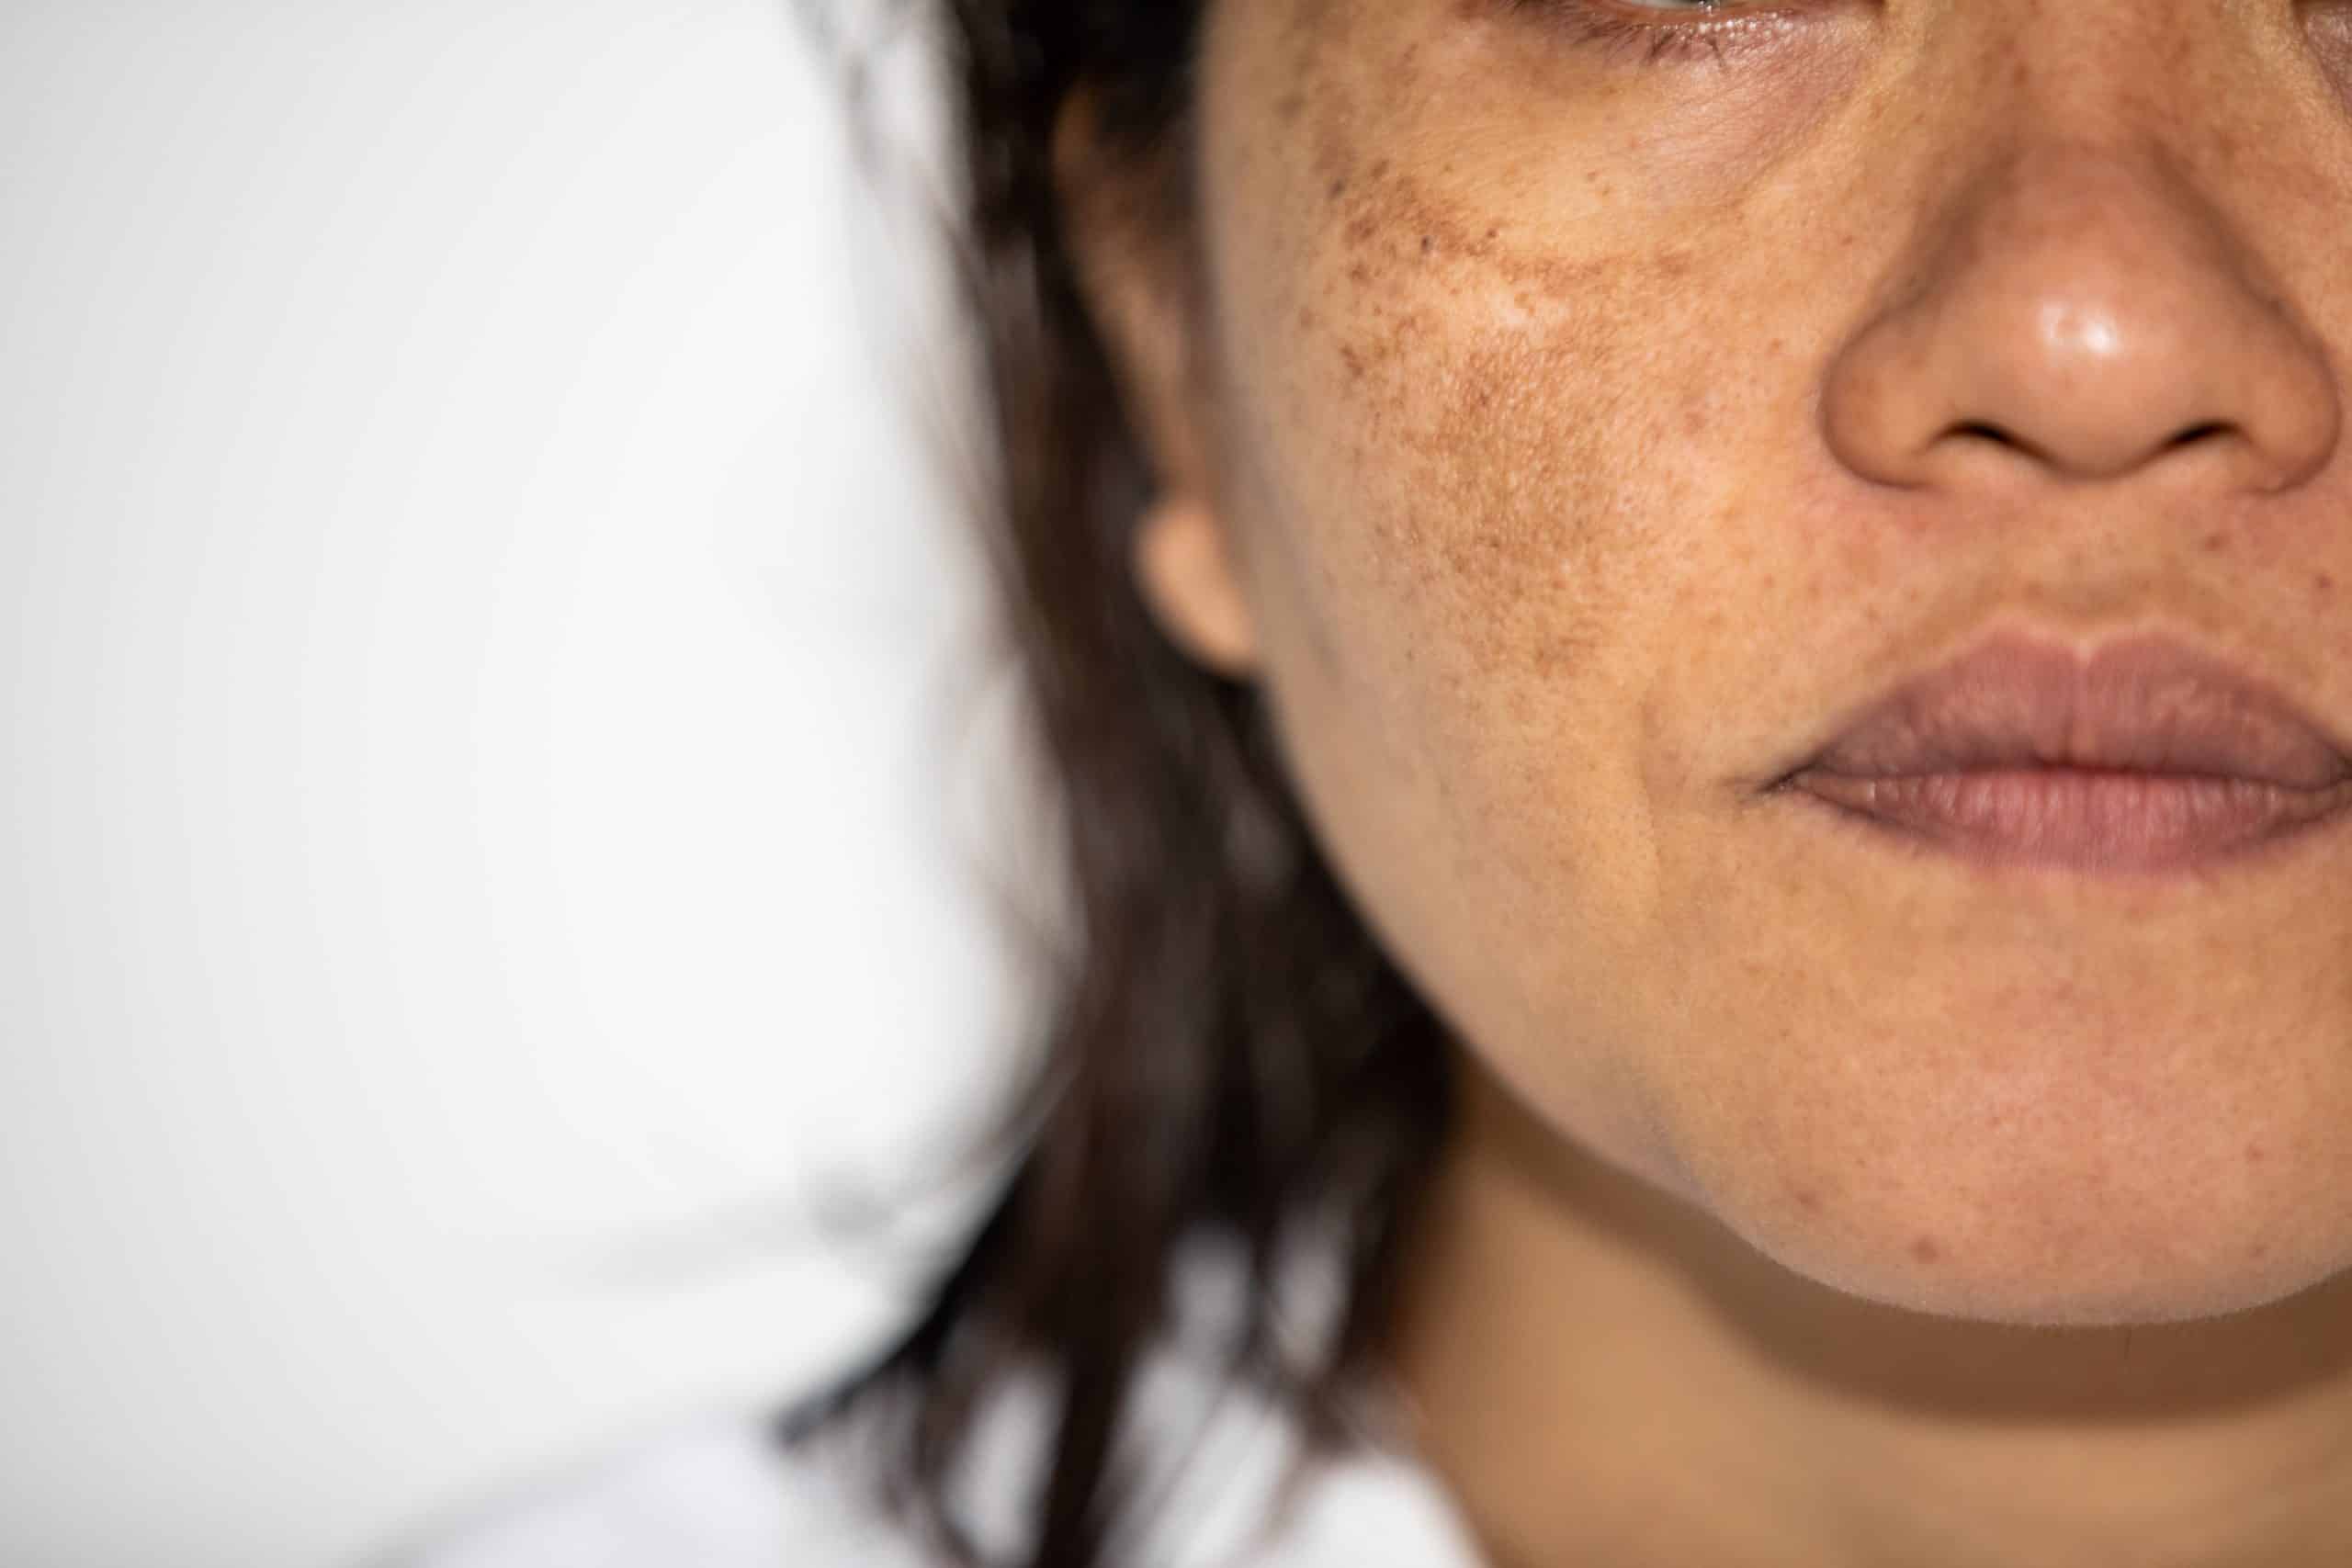 Dark Spots on Face (Melasma): Causes and Treatment